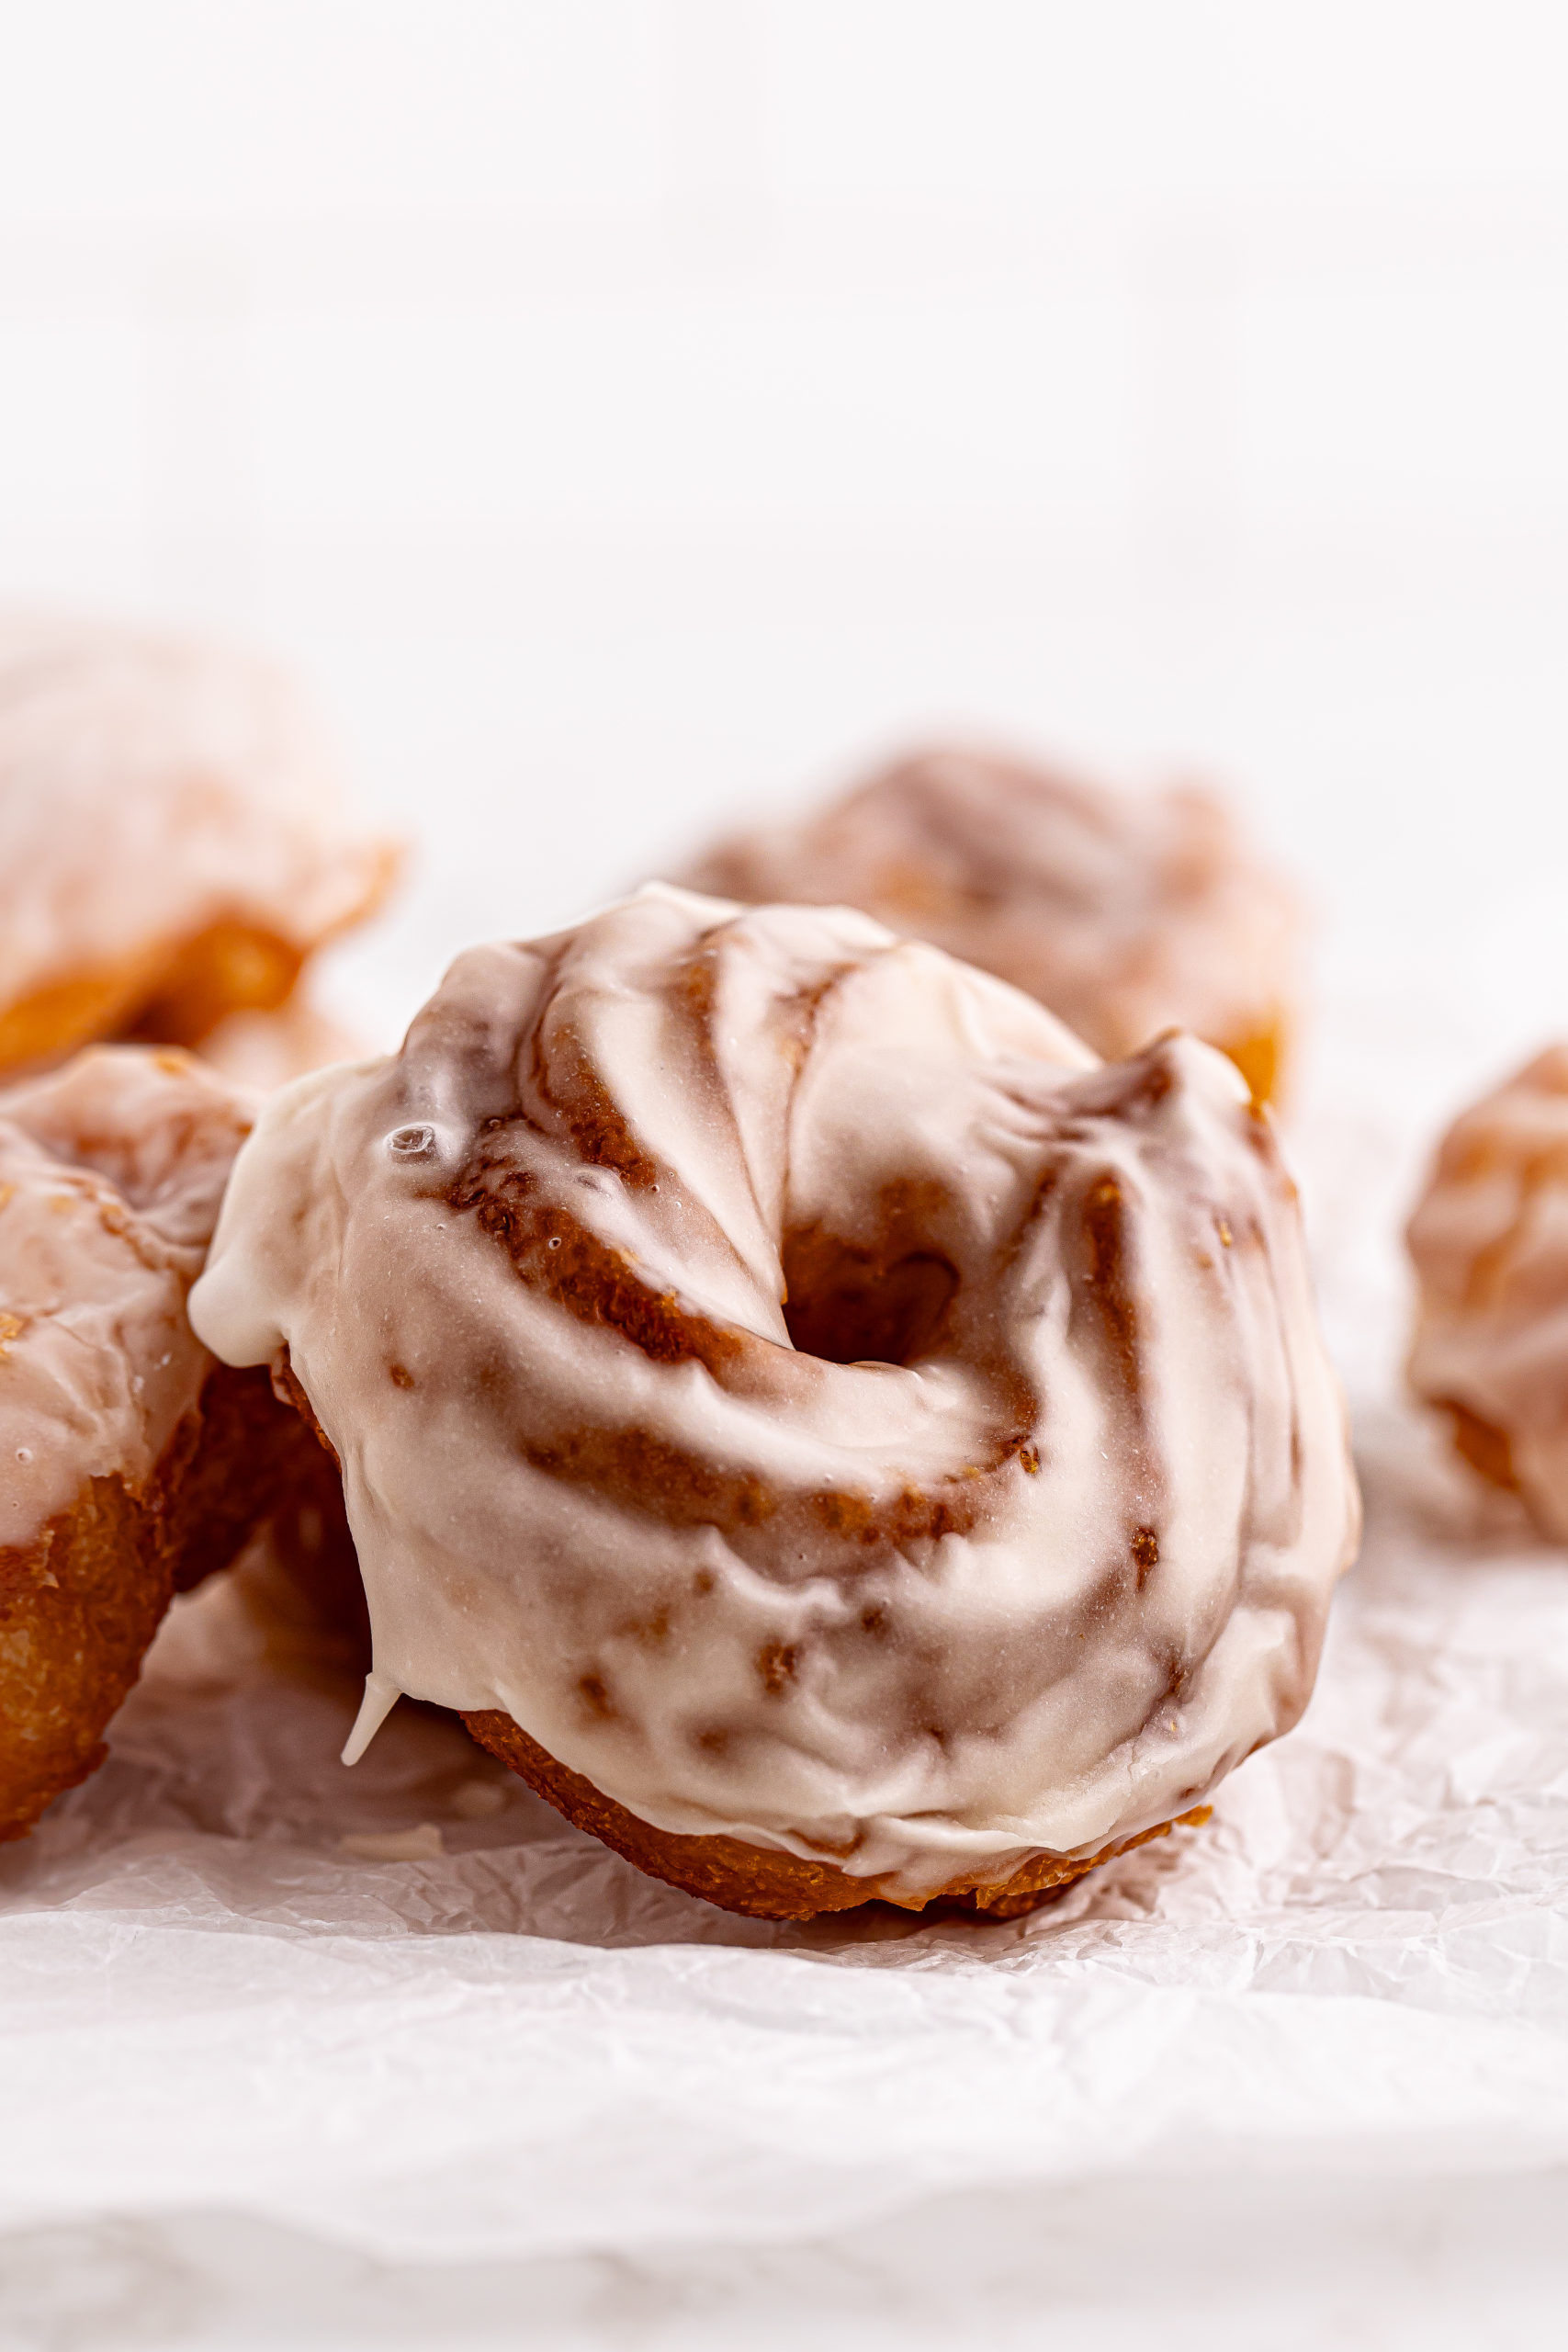 Glazed French crullers on crinkled parchment paper